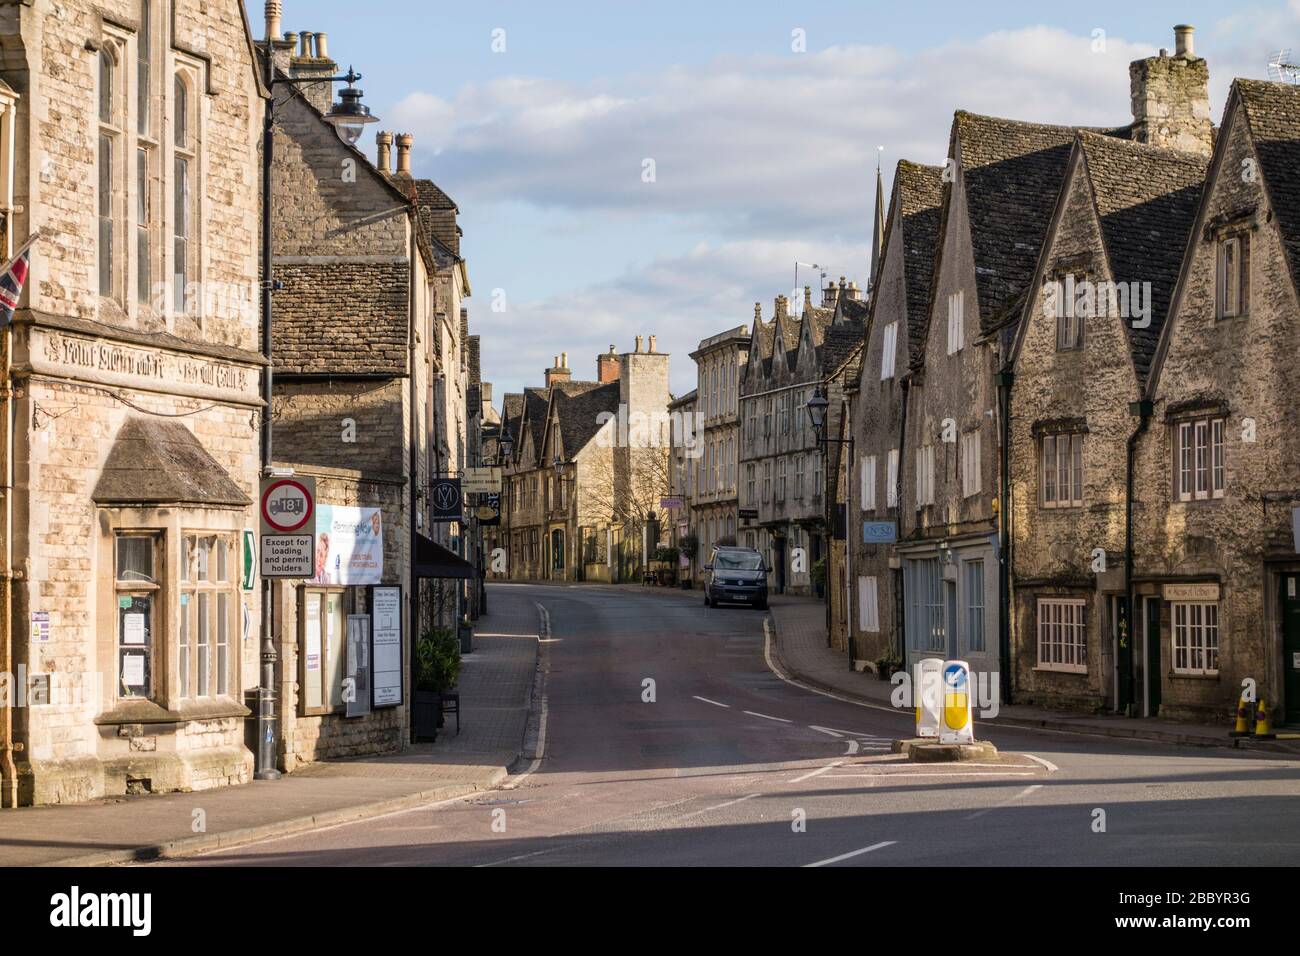 Empty street with no traffic and people due to lockdown caused by Covid 19 pandemic, Tetbury, Gloucestershire, UK Stock Photo